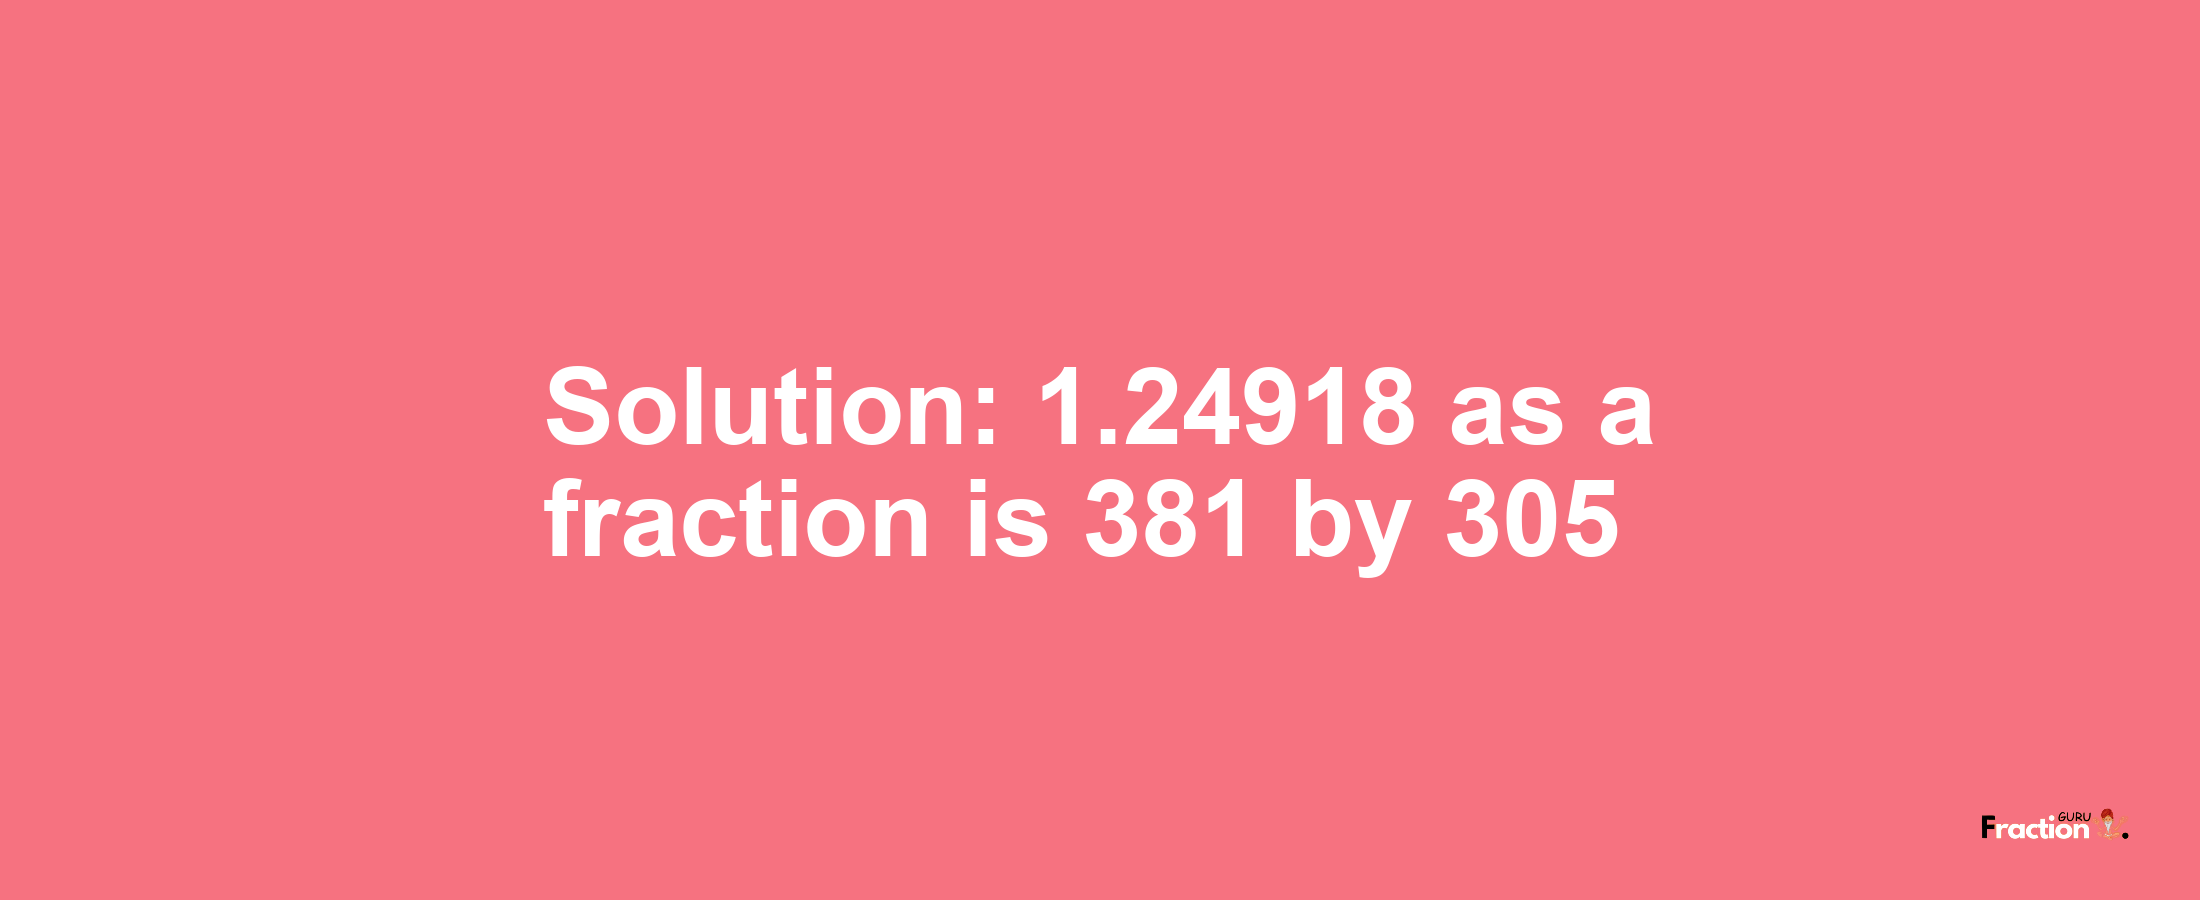 Solution:1.24918 as a fraction is 381/305